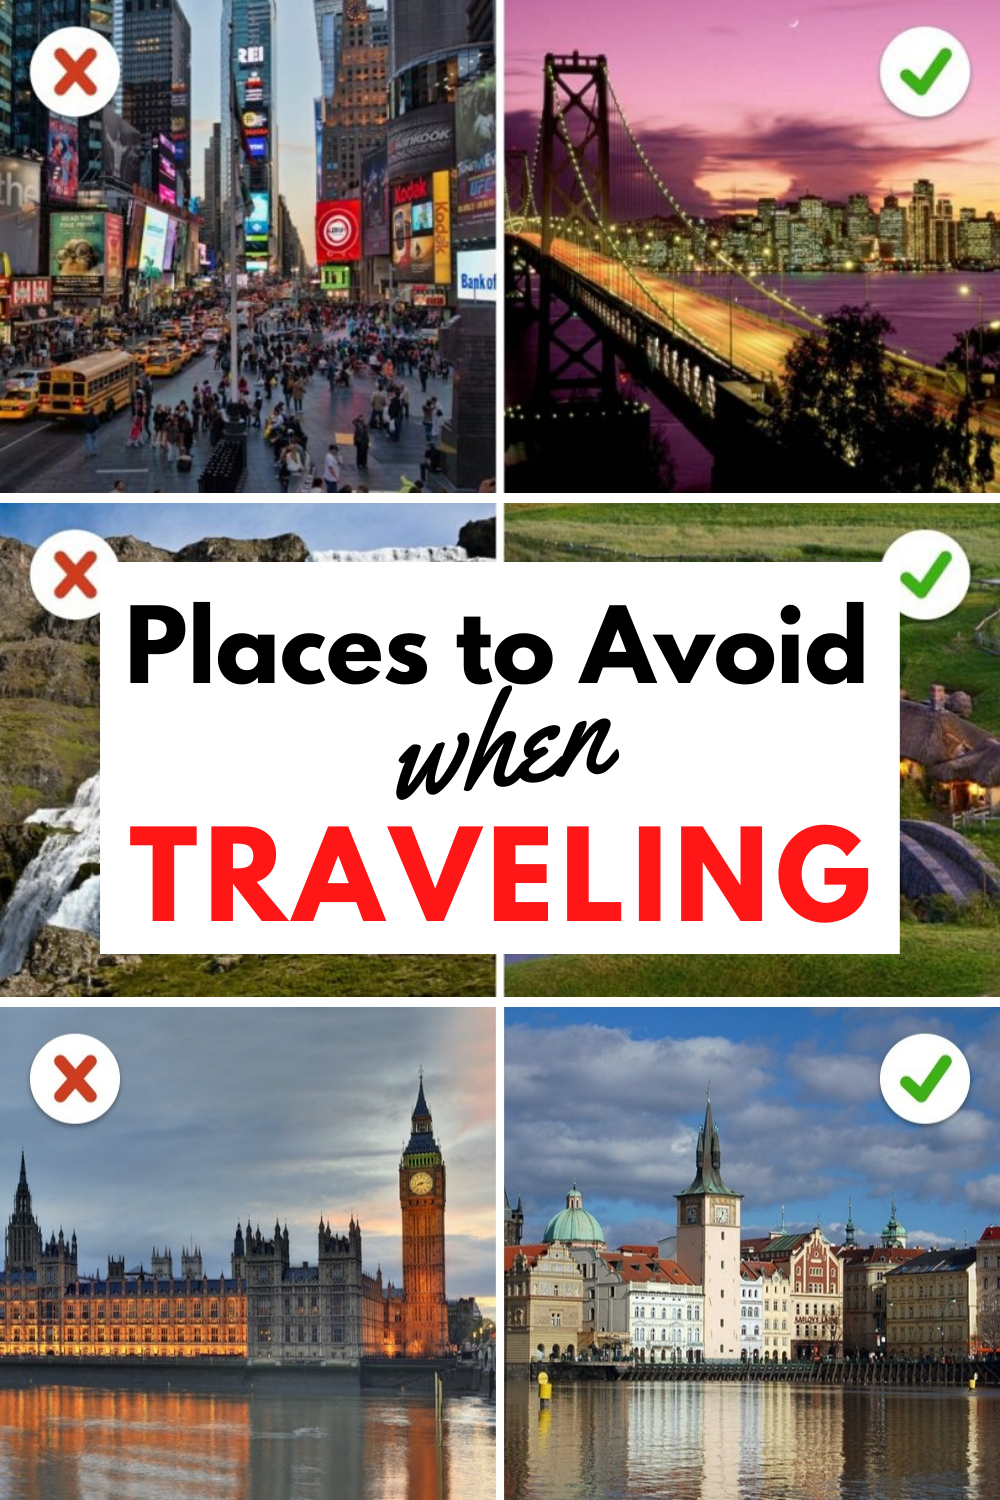  There are common factors that can ruin any trip. That is why you should avoid these overcrowded travel destinations, and replace them with a decent alternative. #traveldestinations #crowdedtraveldestinations #placesyoushouldnottravel 